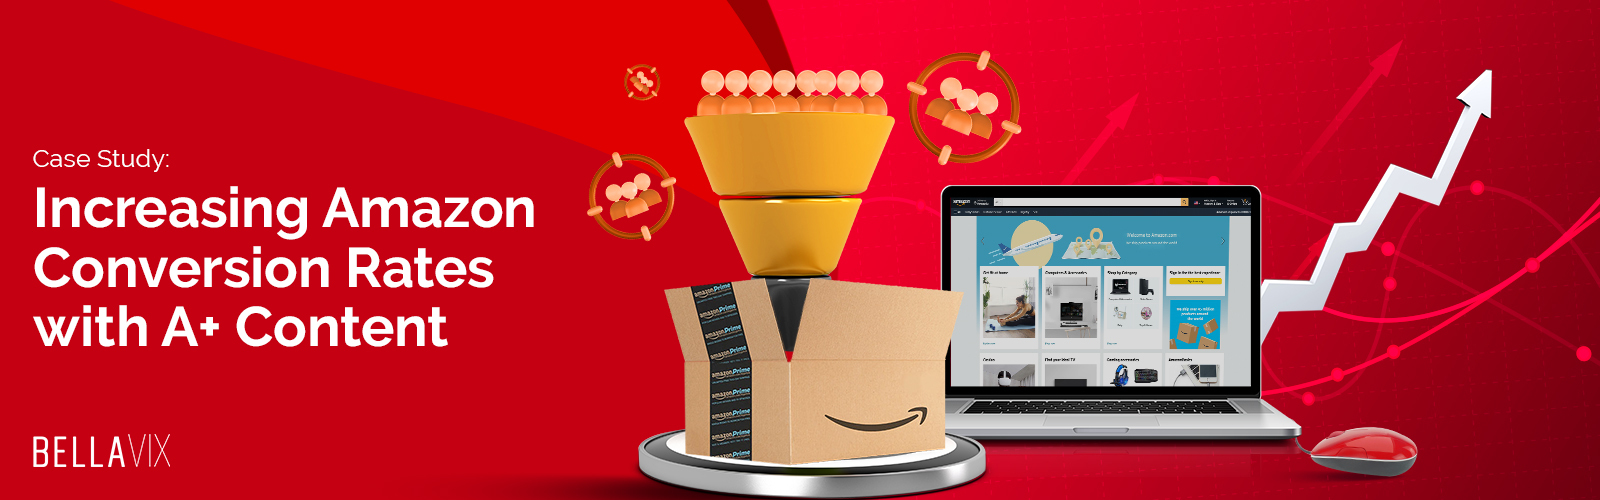 Case Study: Increasing Amazon Conversion Rates with A+ Content 